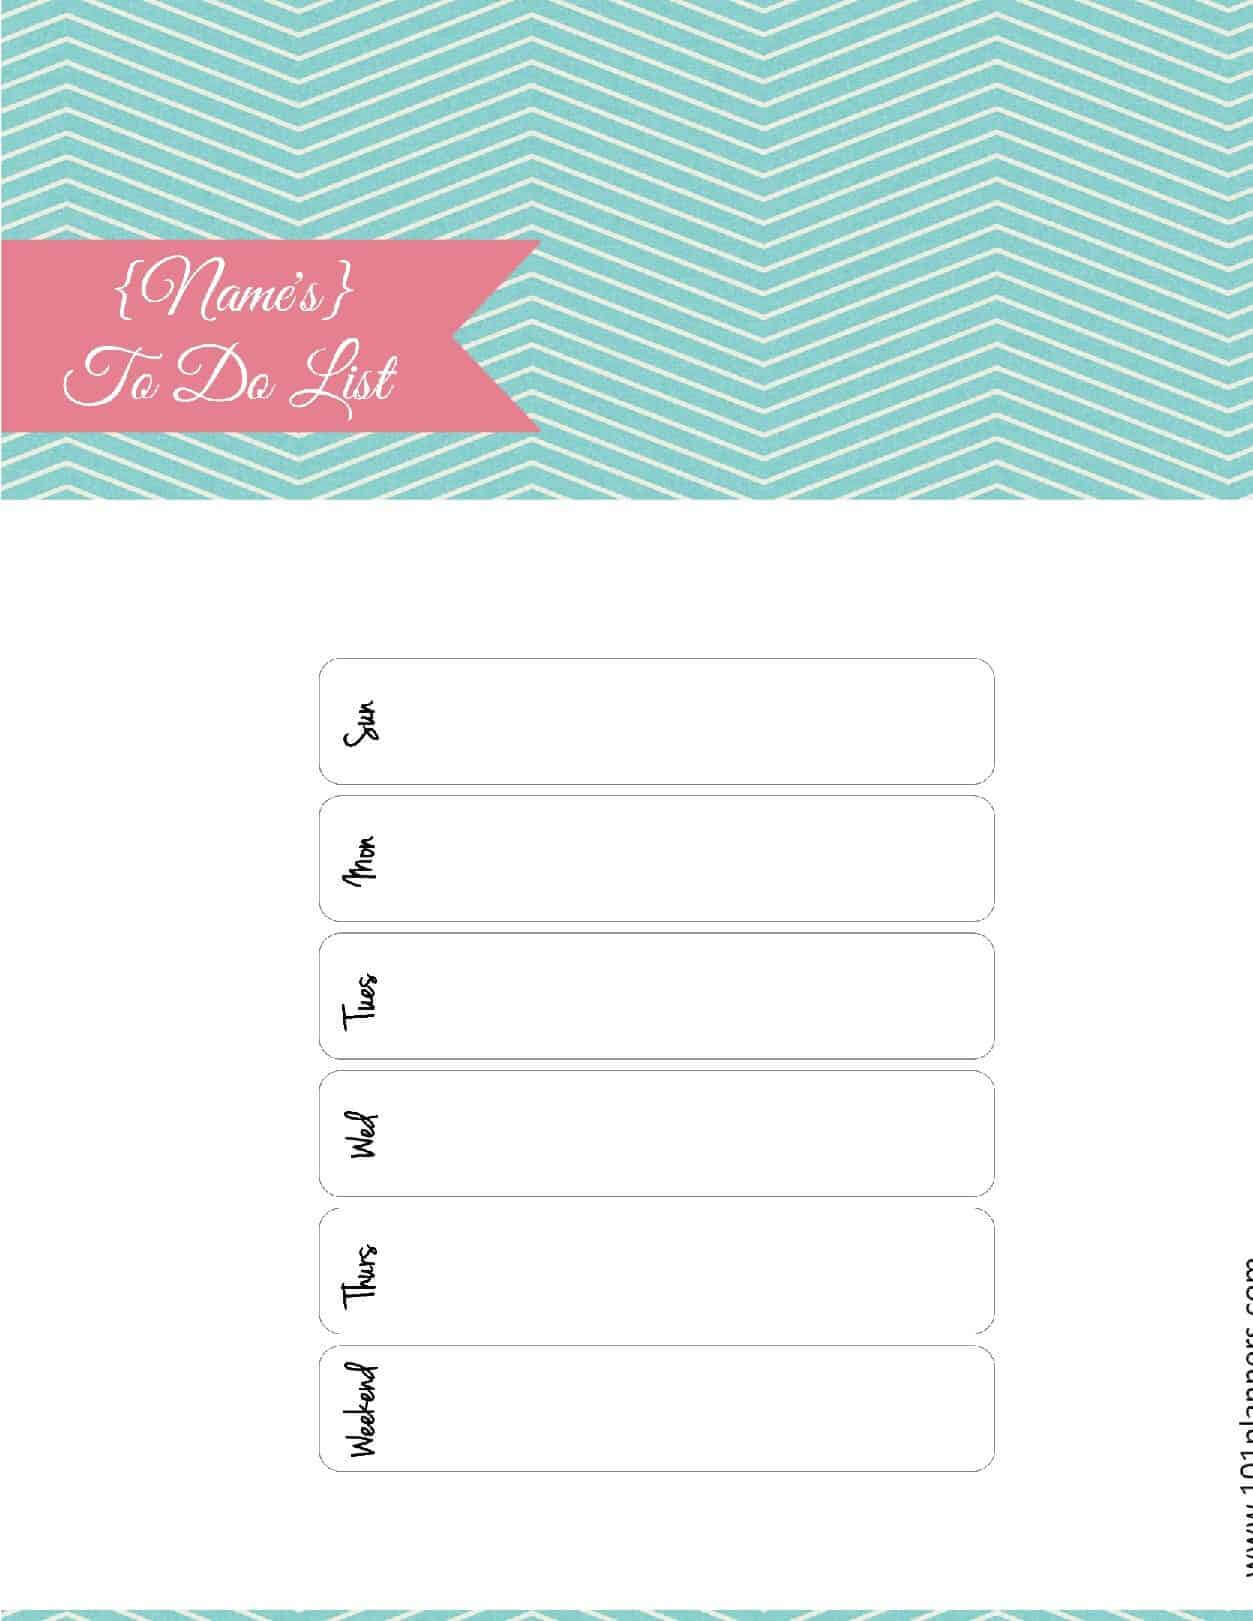 Free Printable To Do List | Print Or Use Online | Access Inside Blank To Do List Template